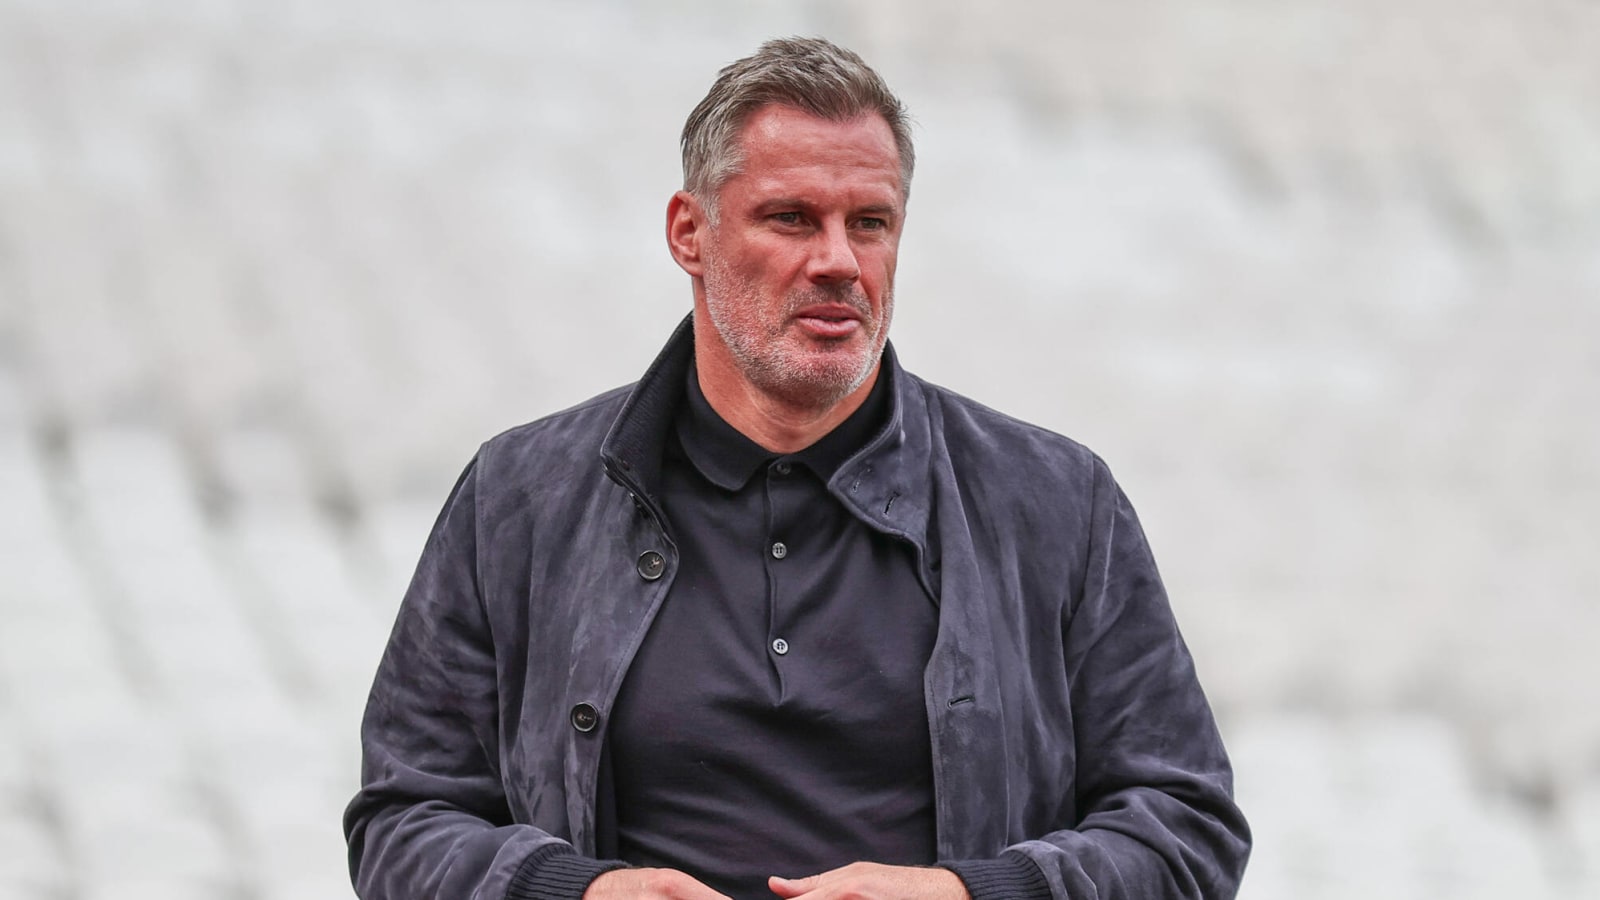 Watch: ‘From a Liverpool perspective’ – Carragher on the result he wants between City and Arsenal